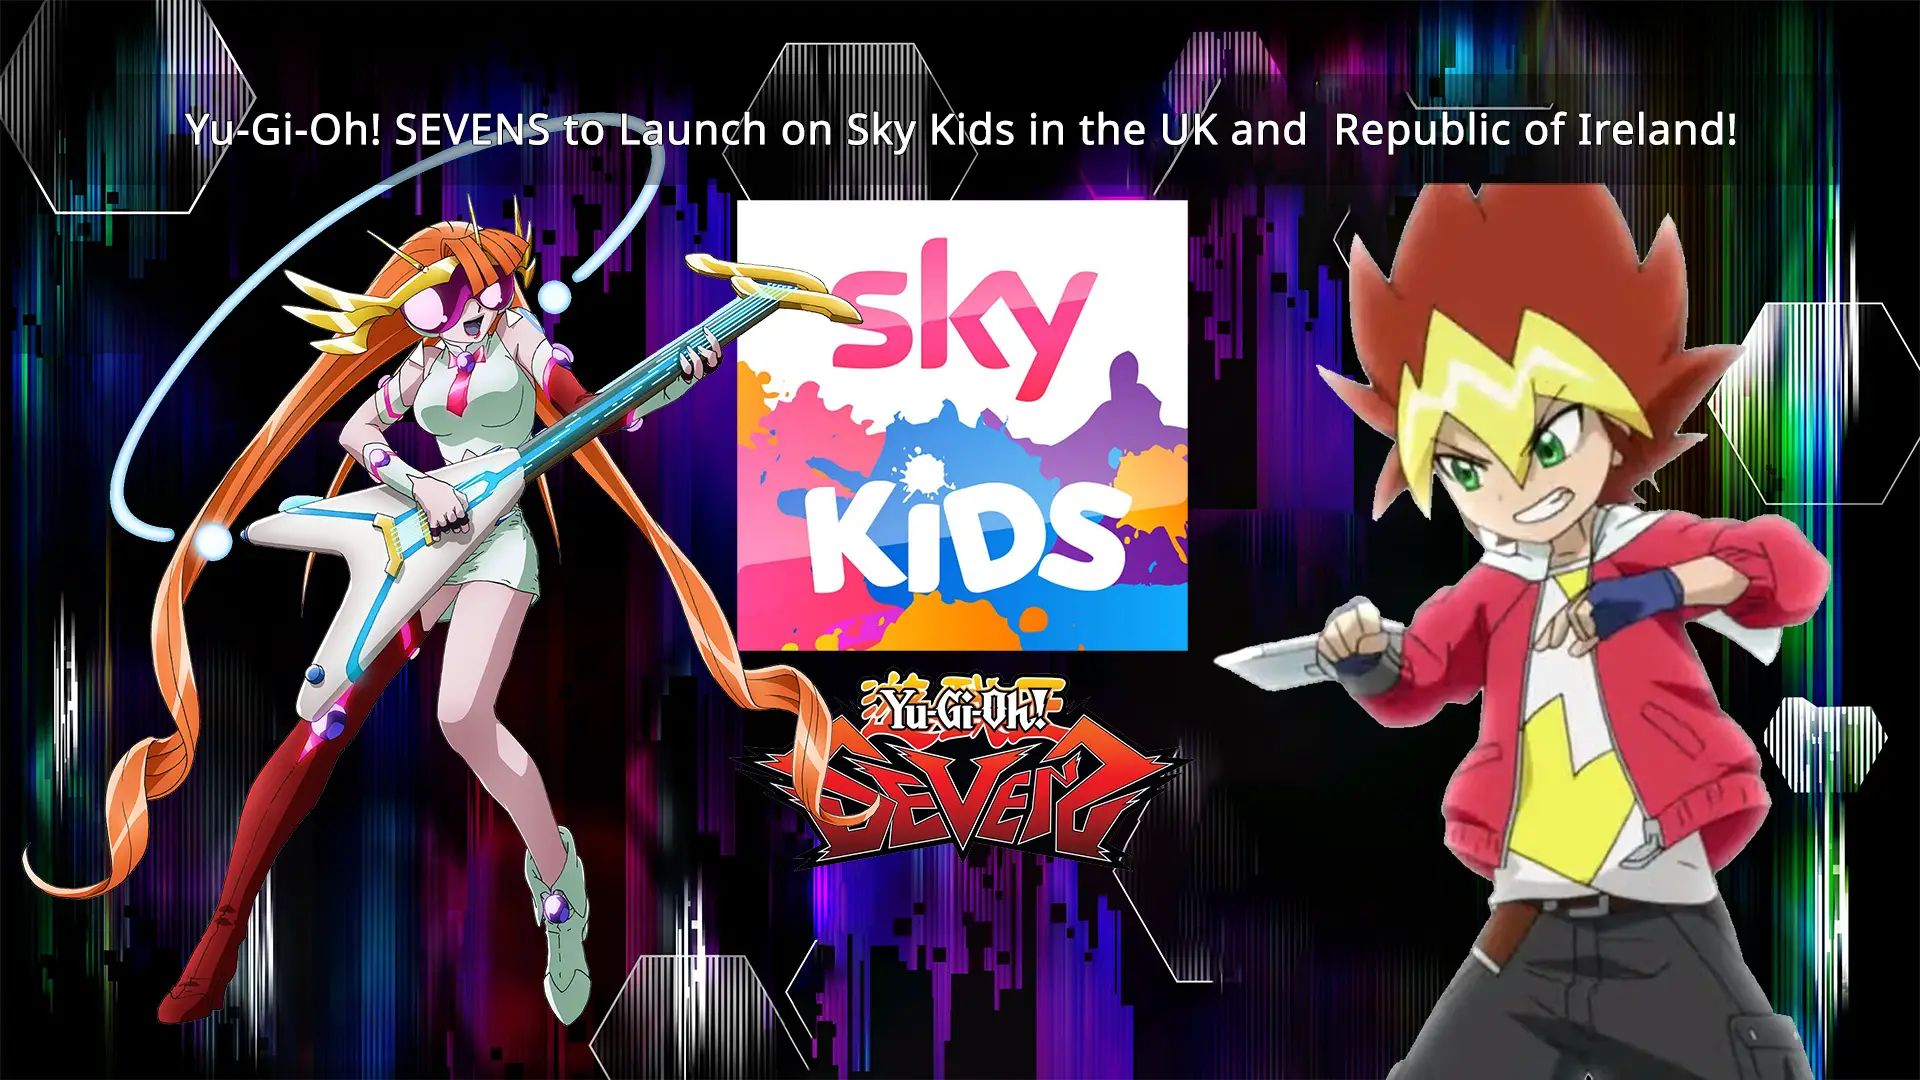 Yu-Gi-Oh!' streams on Sky Kids and AnimeLab in the UK and Aus-NZ  respectively 